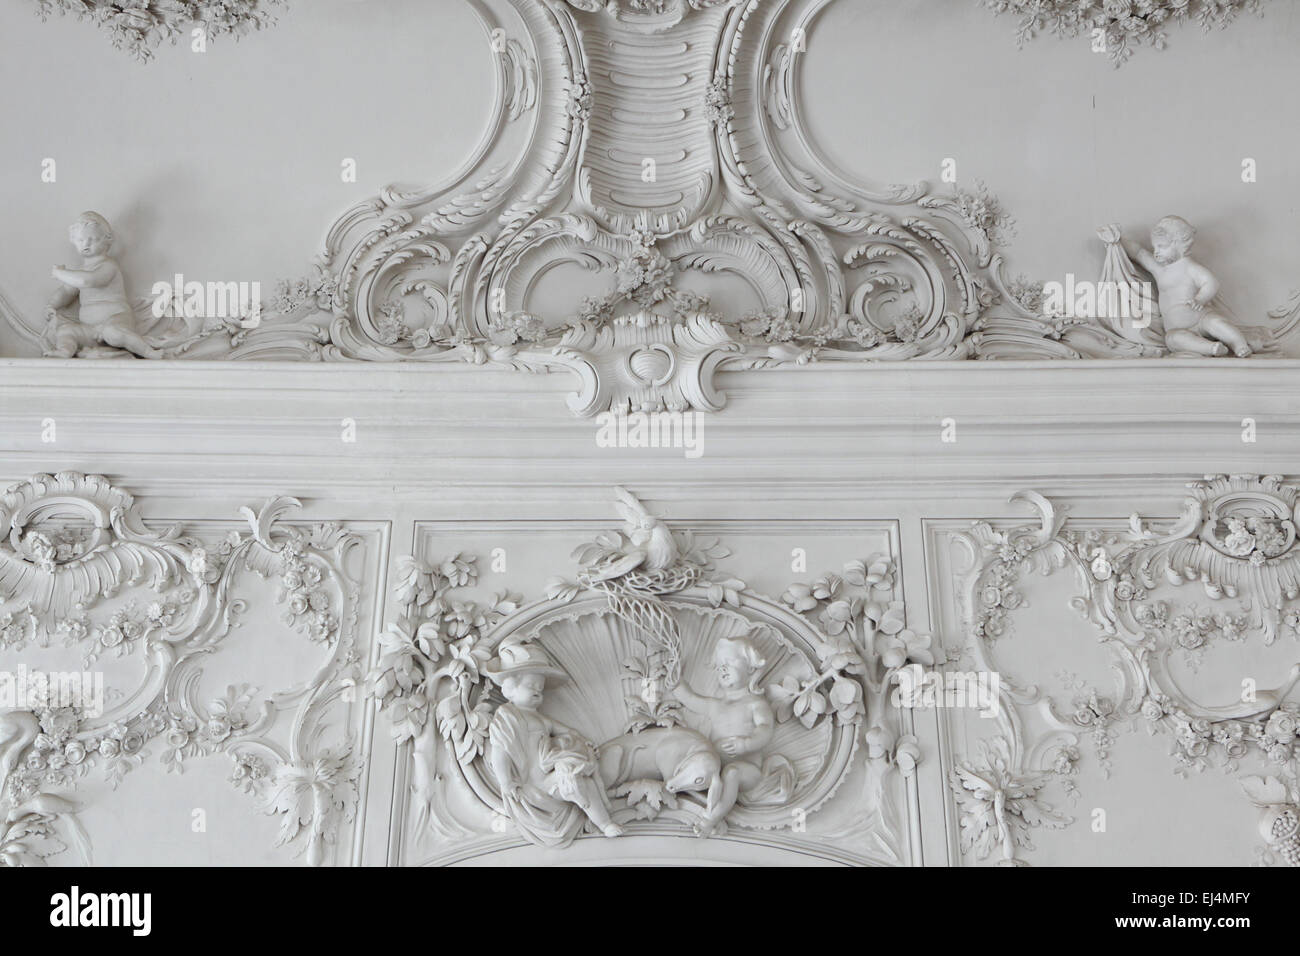 Rococo stucco decoration by German sculptor Johann Michael Graff in the White Hall of the Rundale Palace, Latvia. Stock Photo